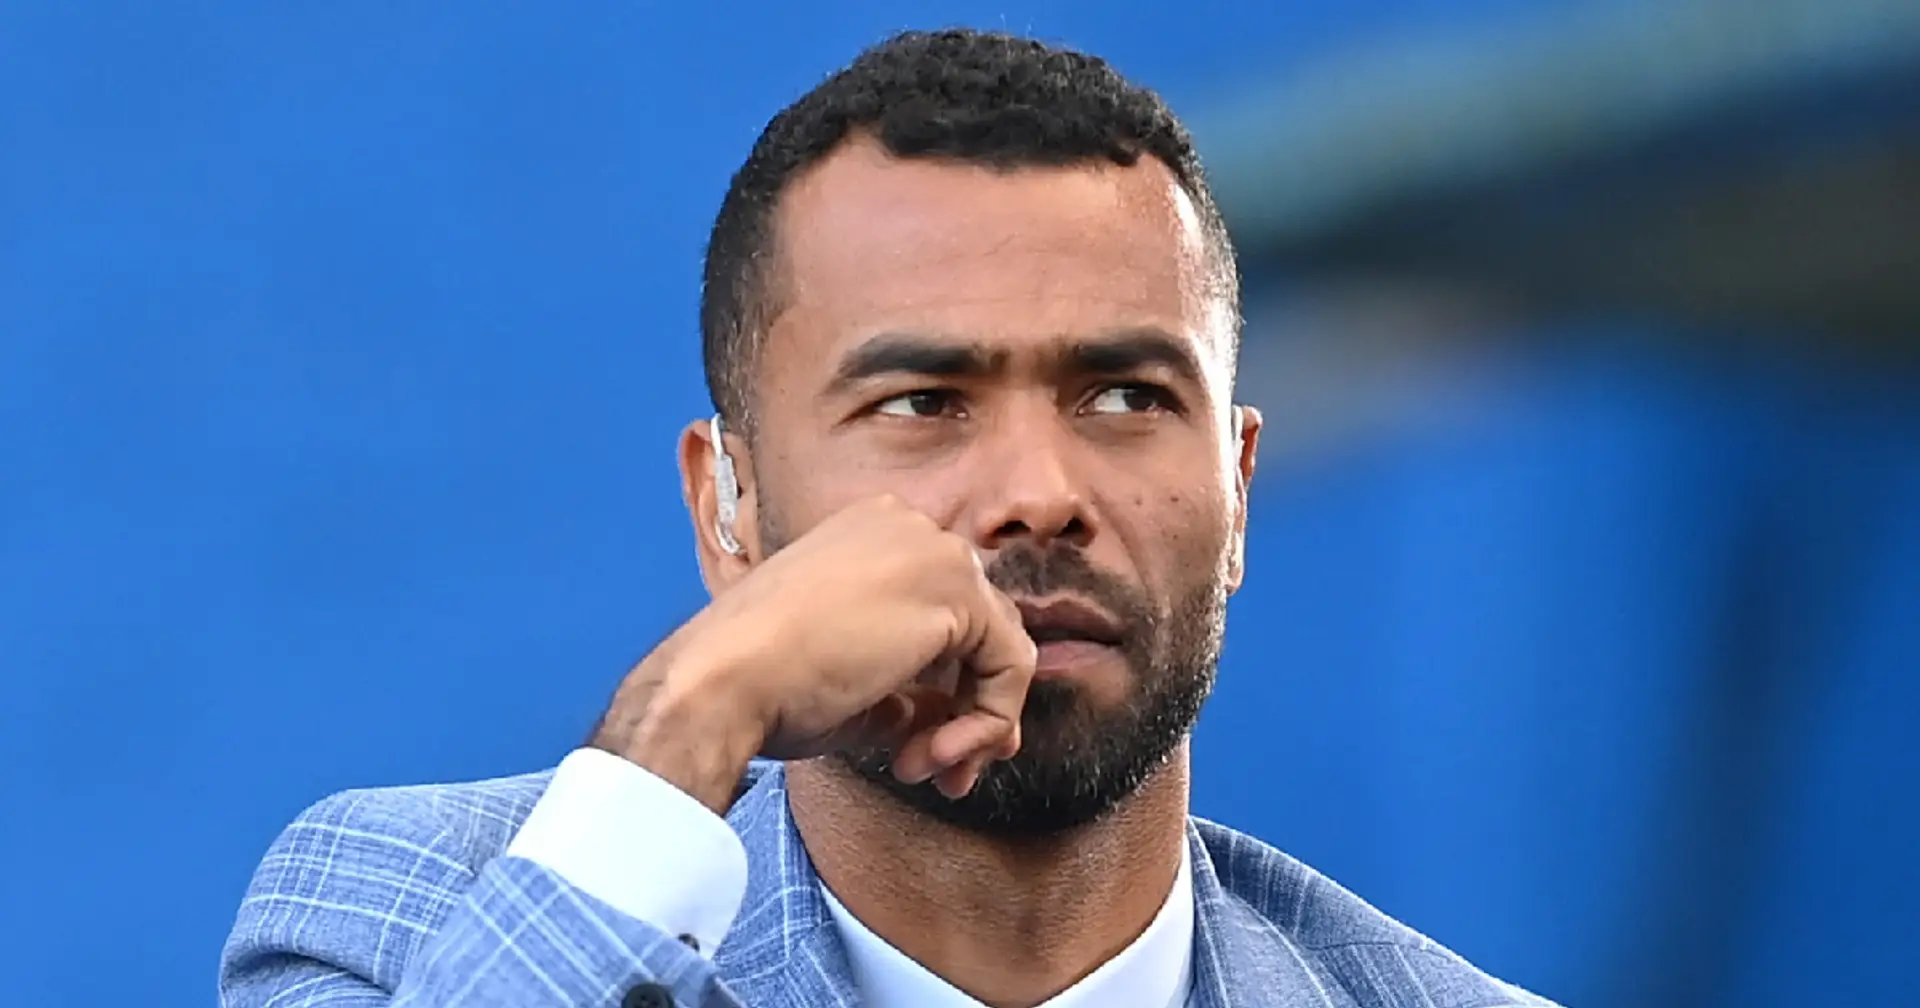 'The invaders threatened to have his fingers chopped off': court details Ashley Cole's harrowing experience 